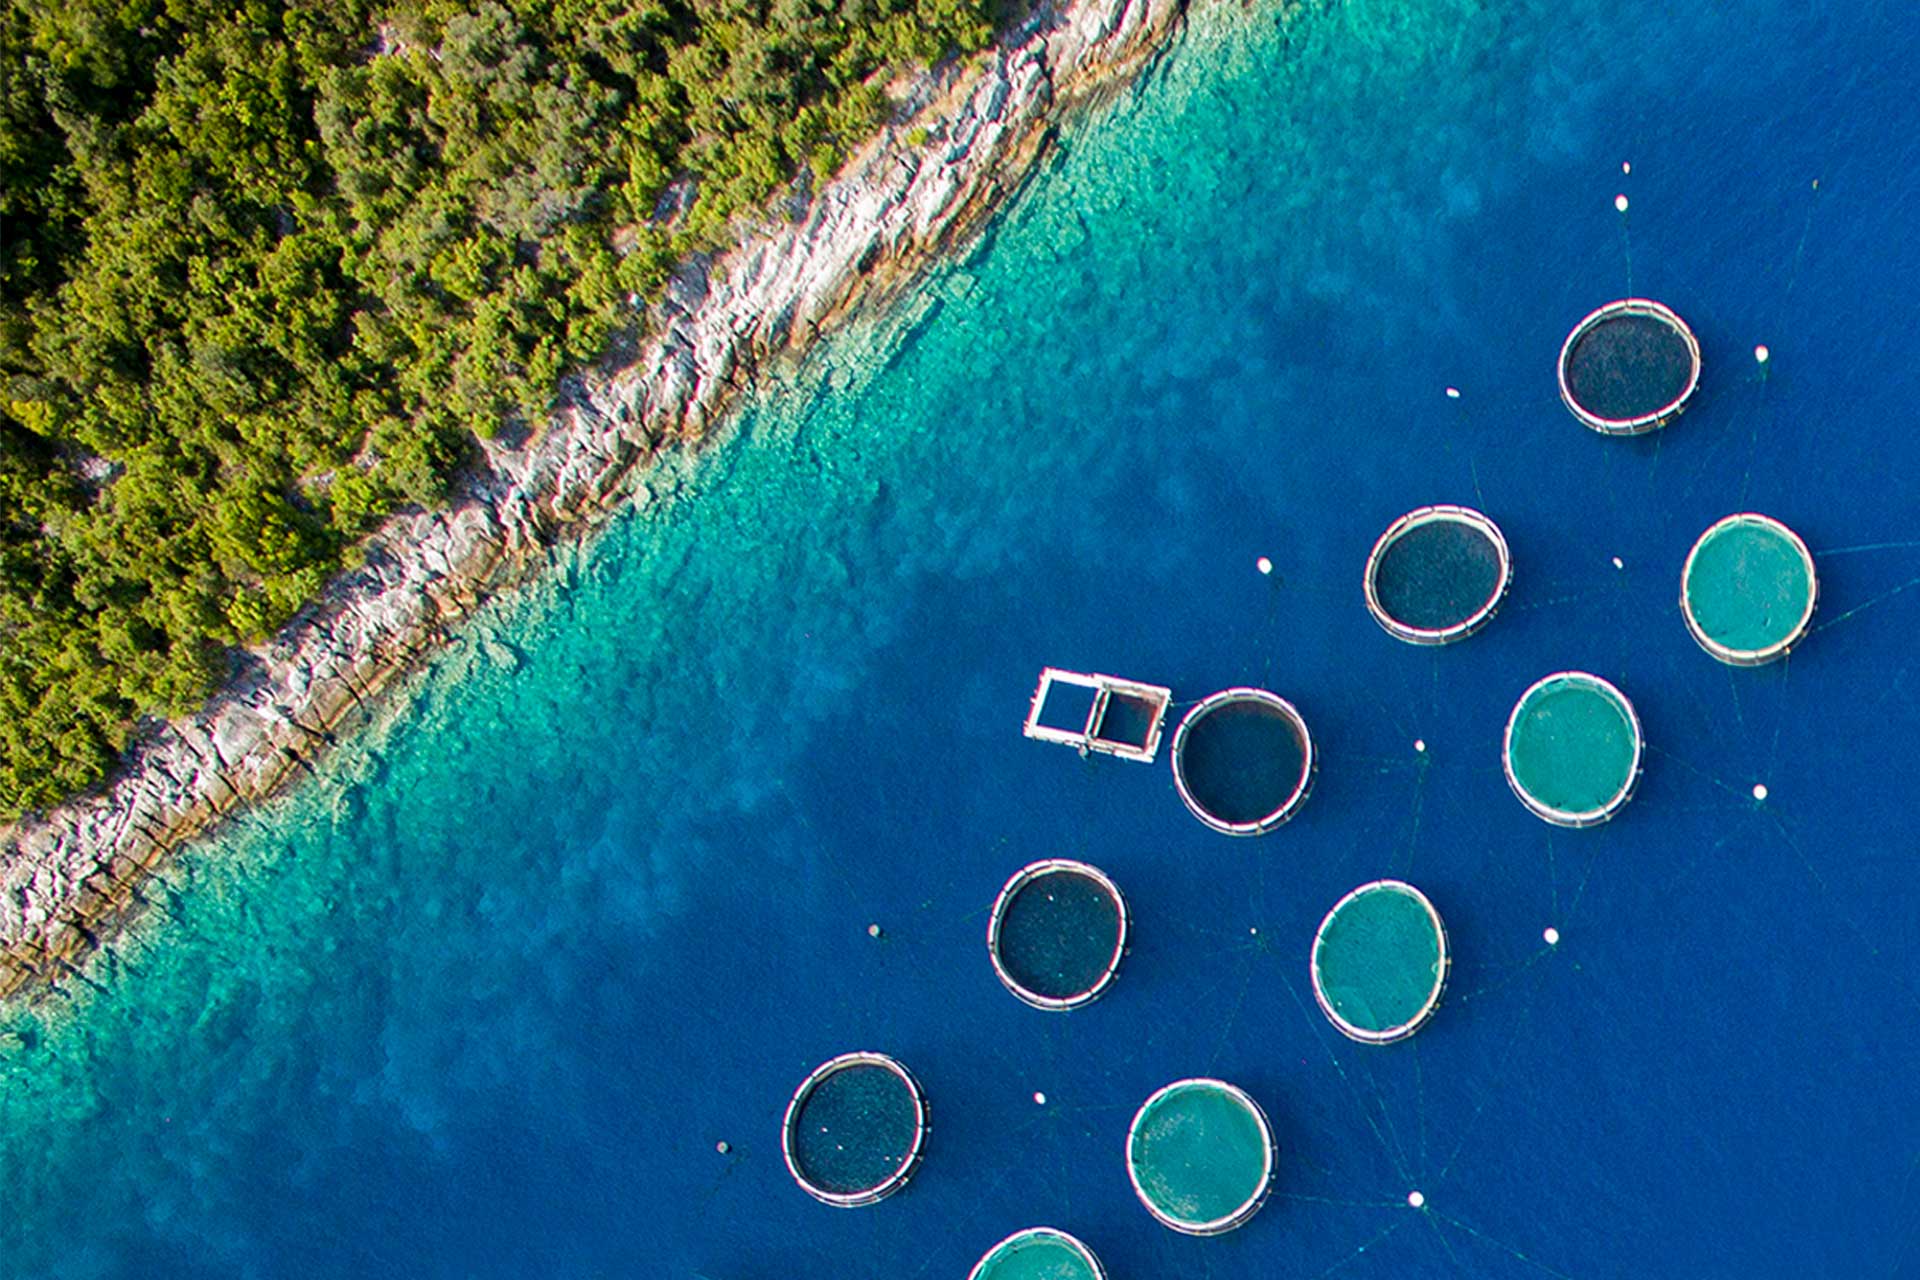 Riba Mljet nets in the clear waters of Adriatica